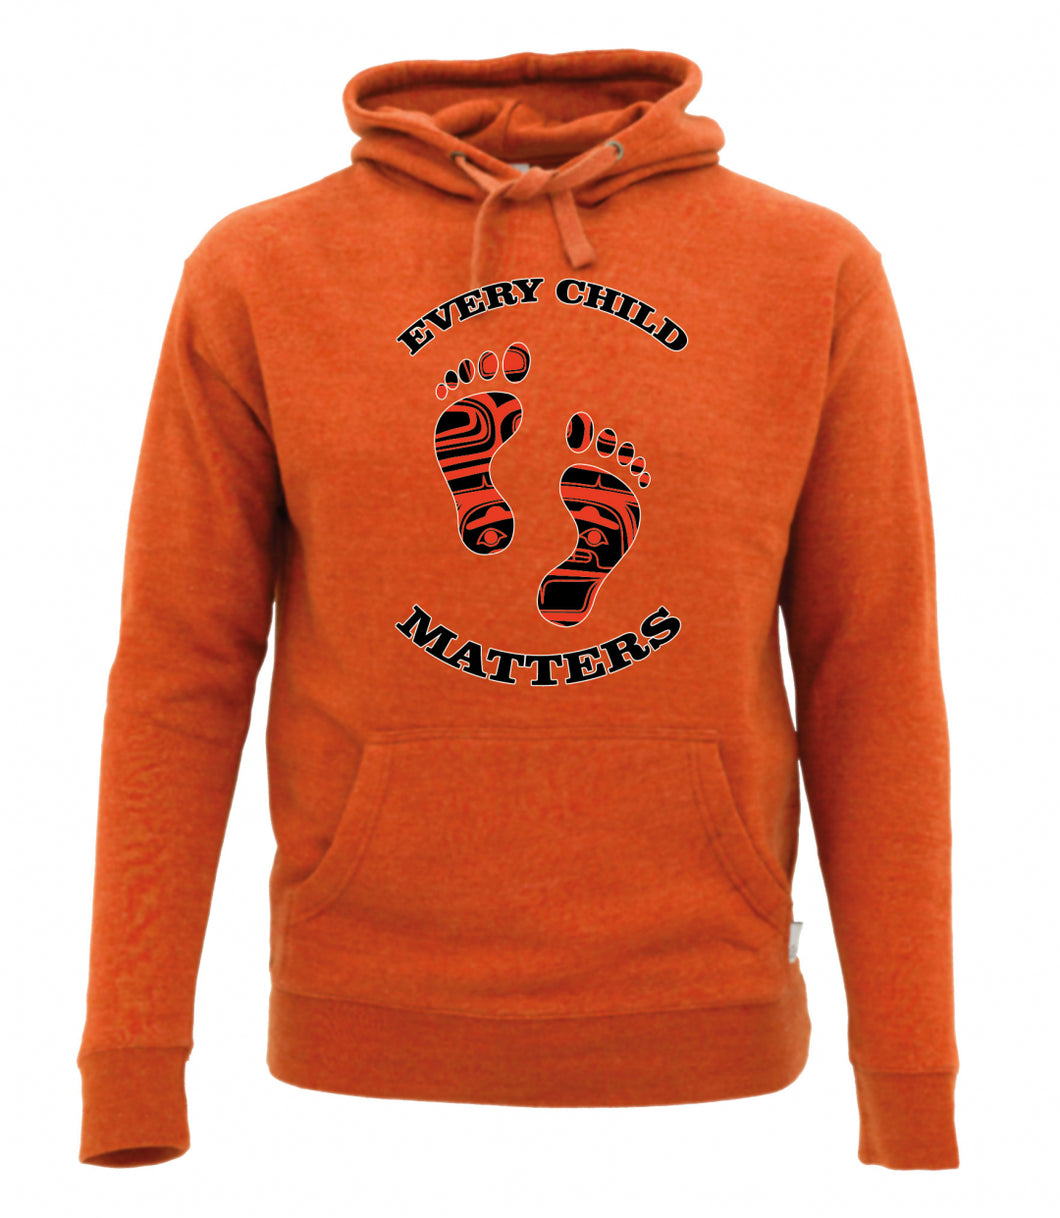 Every Child Matters Footsteps Adult Hoody